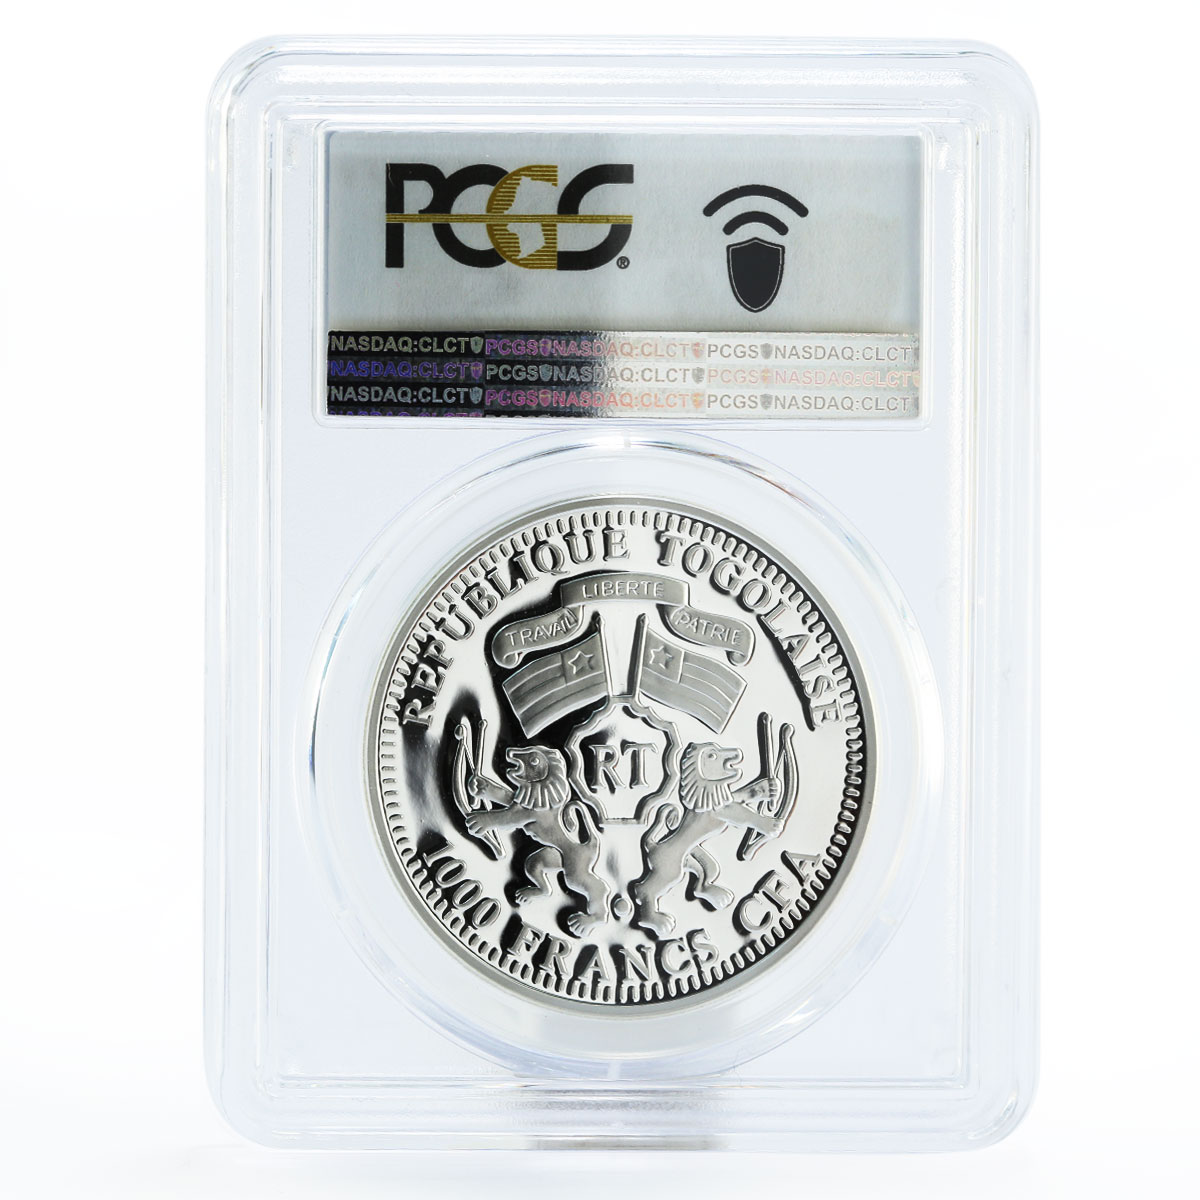 Togo 1000 francs Year of the Chinese Rabbit PR70 PCGS silver coin 2011